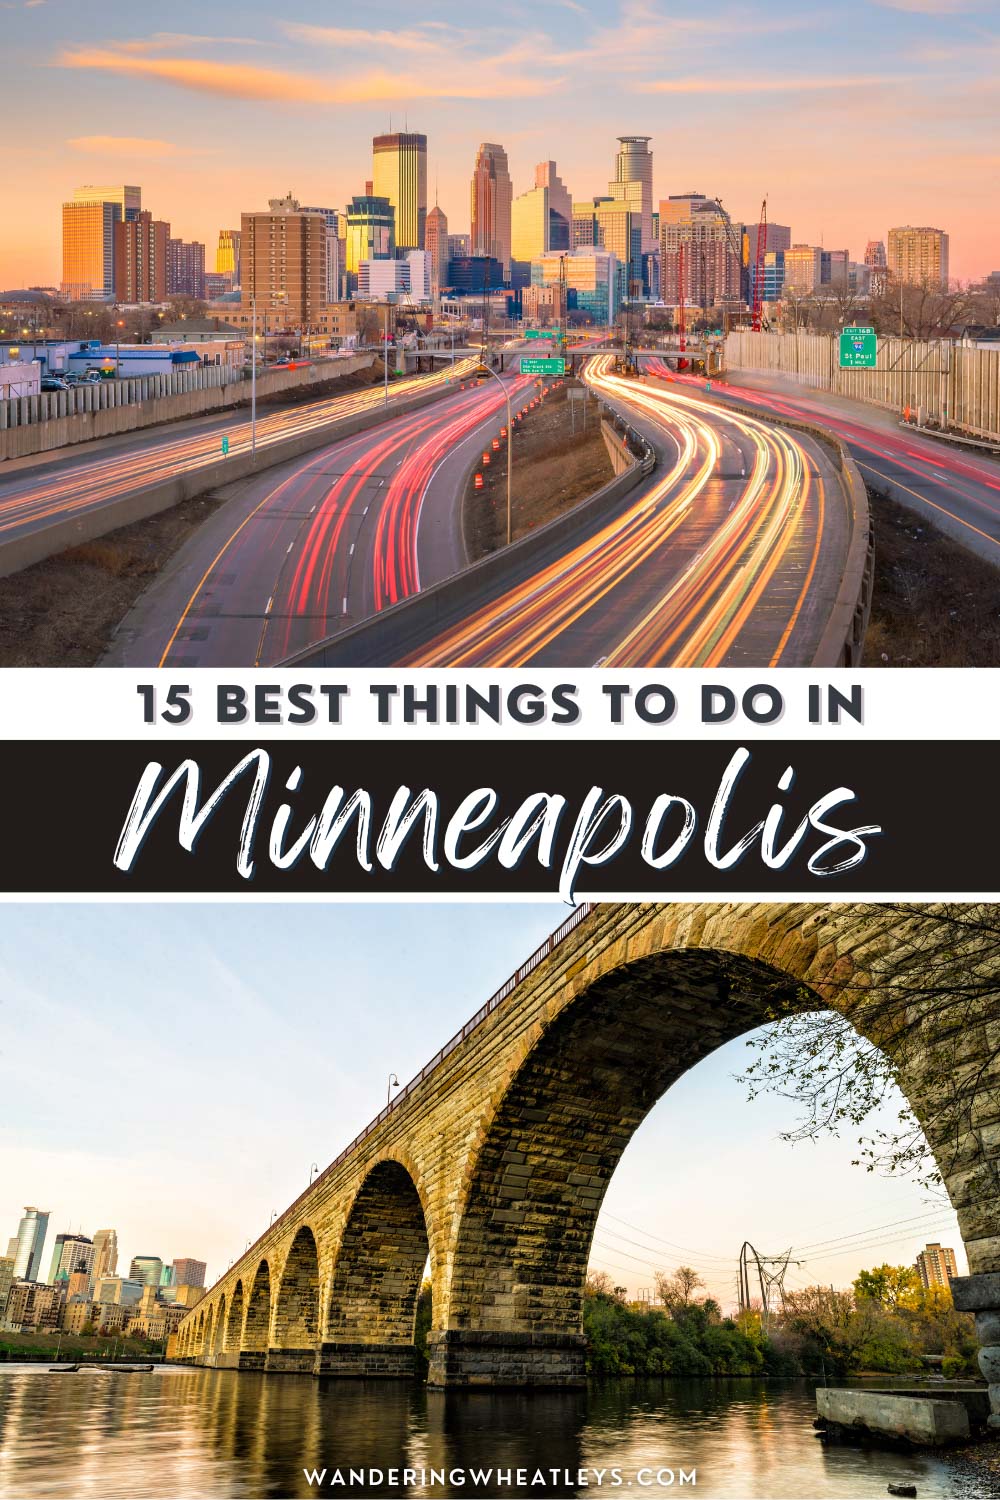 The Best Things to do in Minneapolis